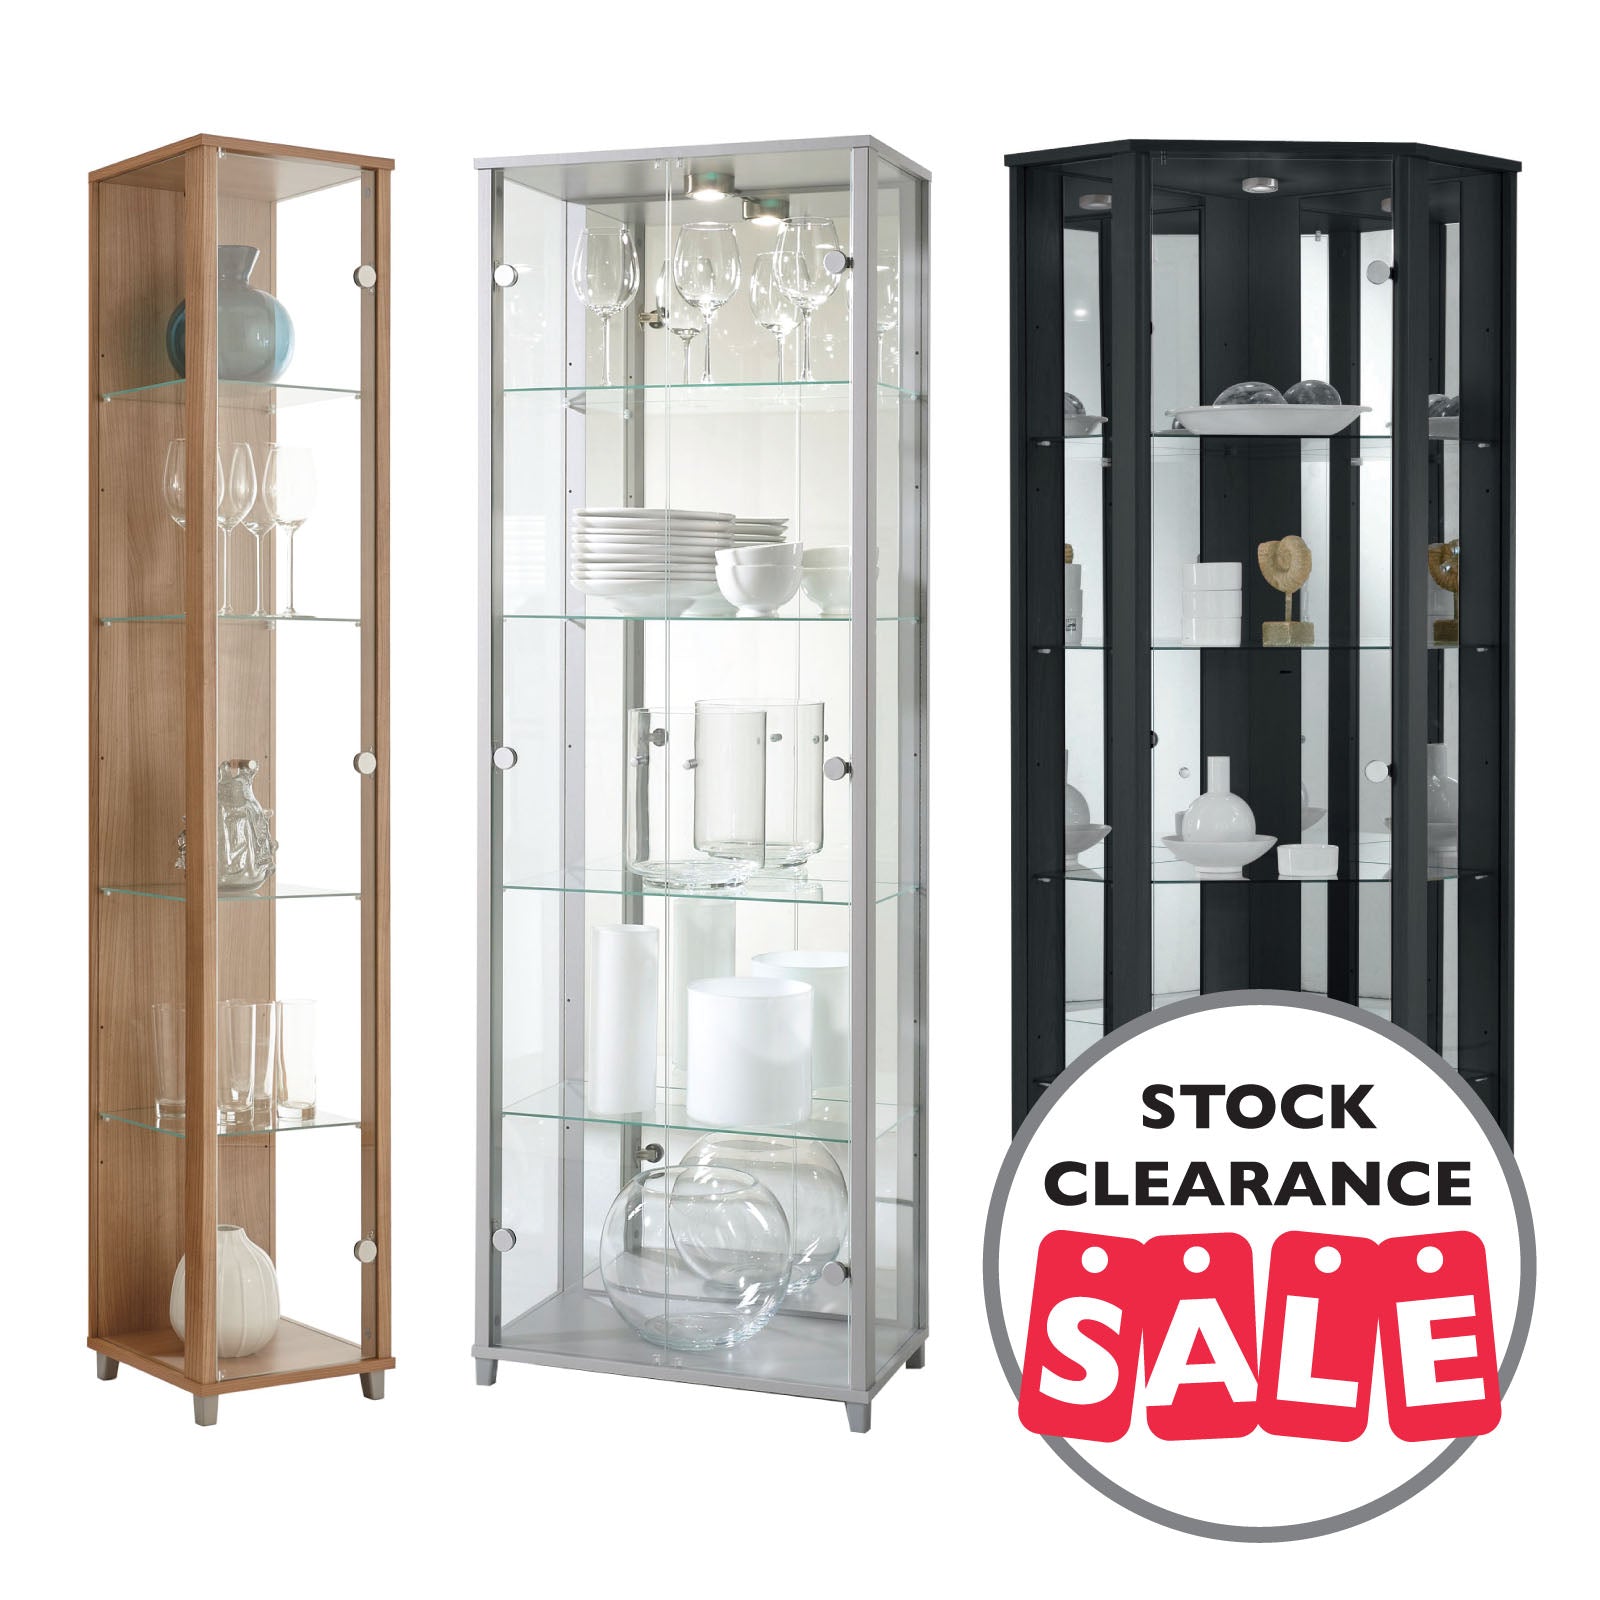 Reduced To Clear Glass Display Cabinets Sale Low Price Display